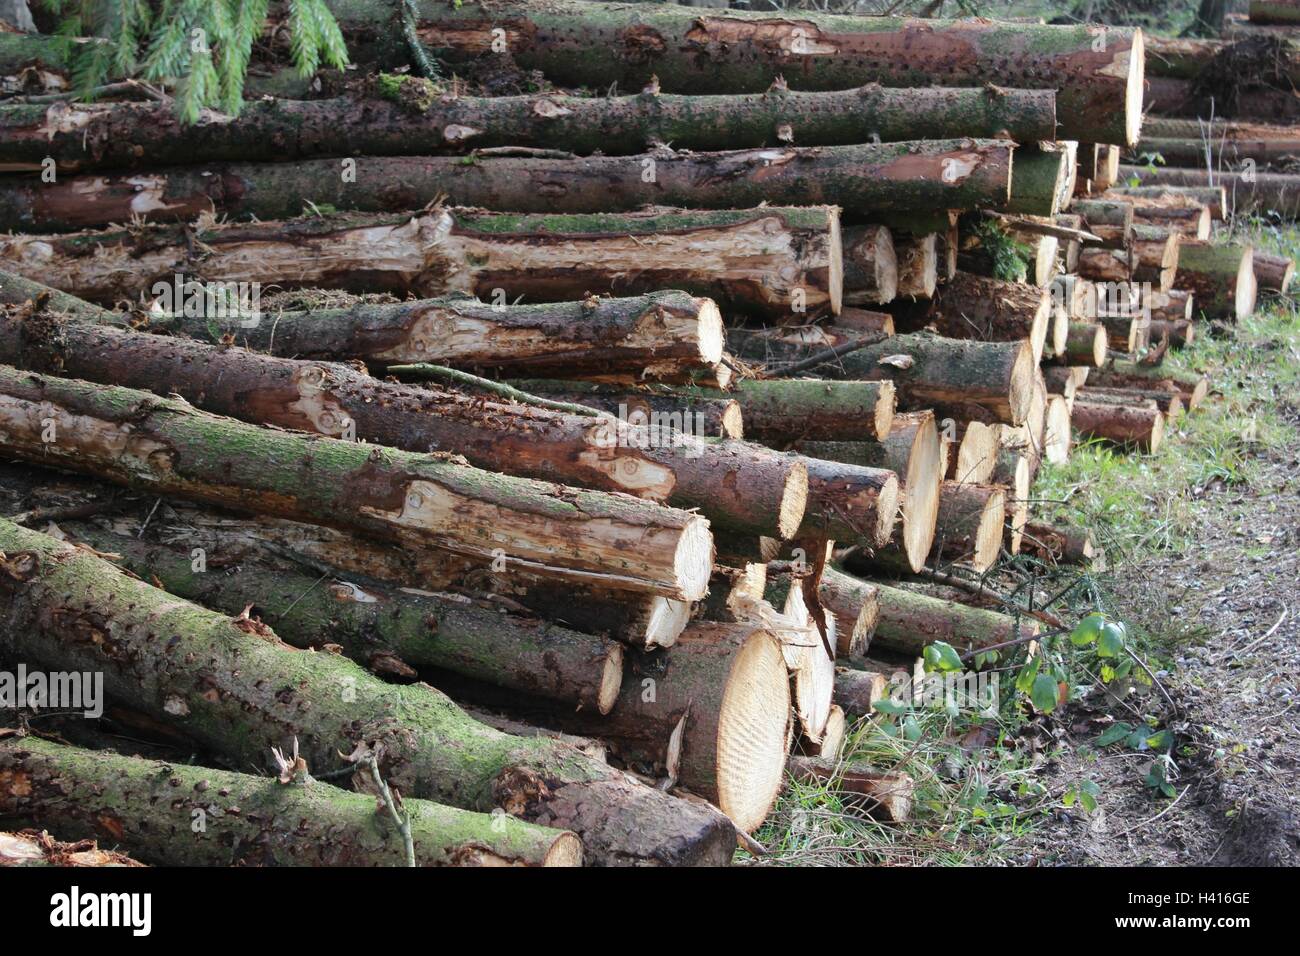 Woodland cut logs in a log pile a wonderful home for bugs and beasties. Stock Photo